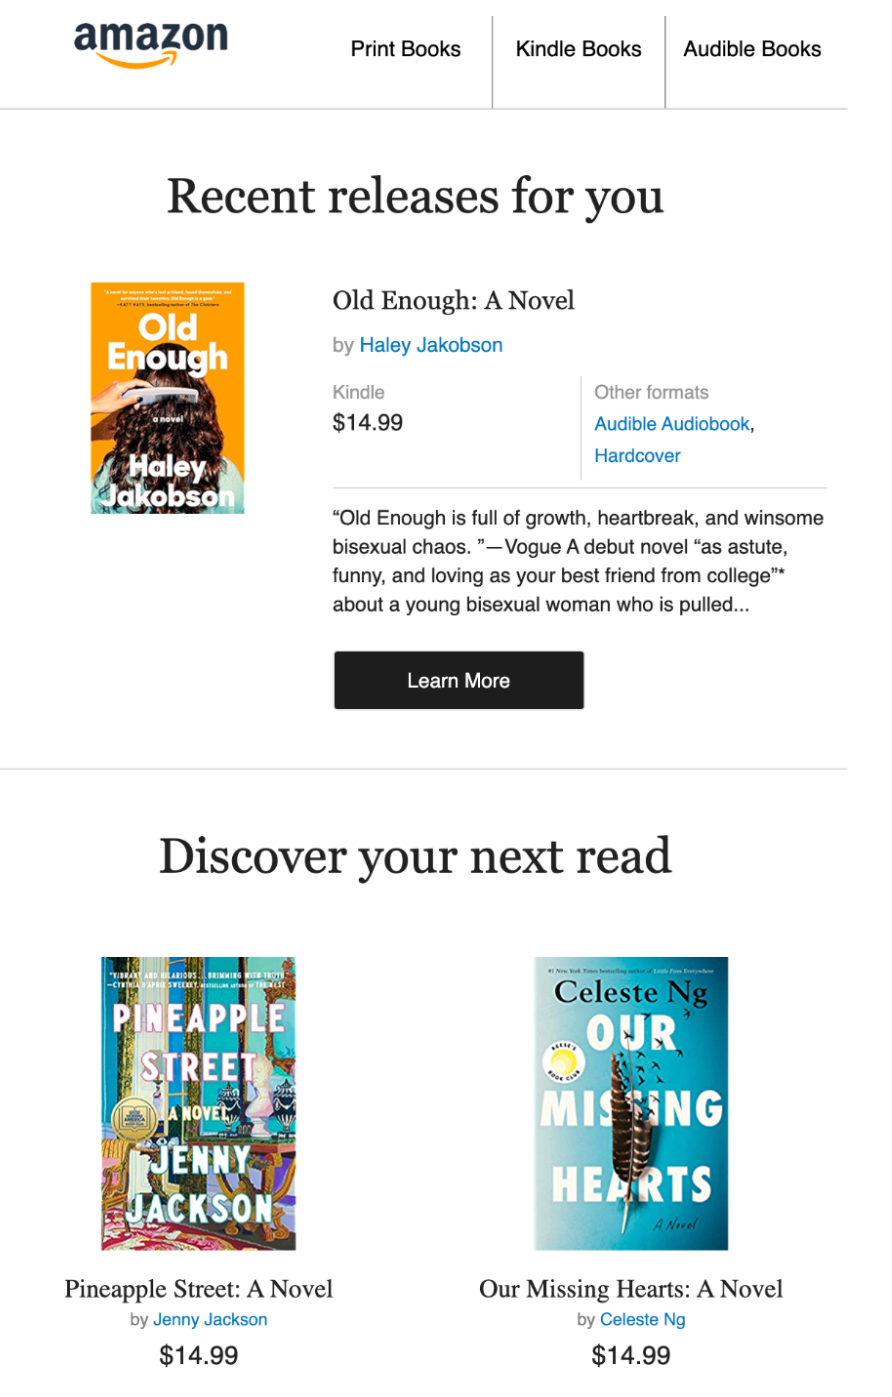 Product recommendation email from Amazon with the heading Recent releases for you and the book Old Enough: A Novel.